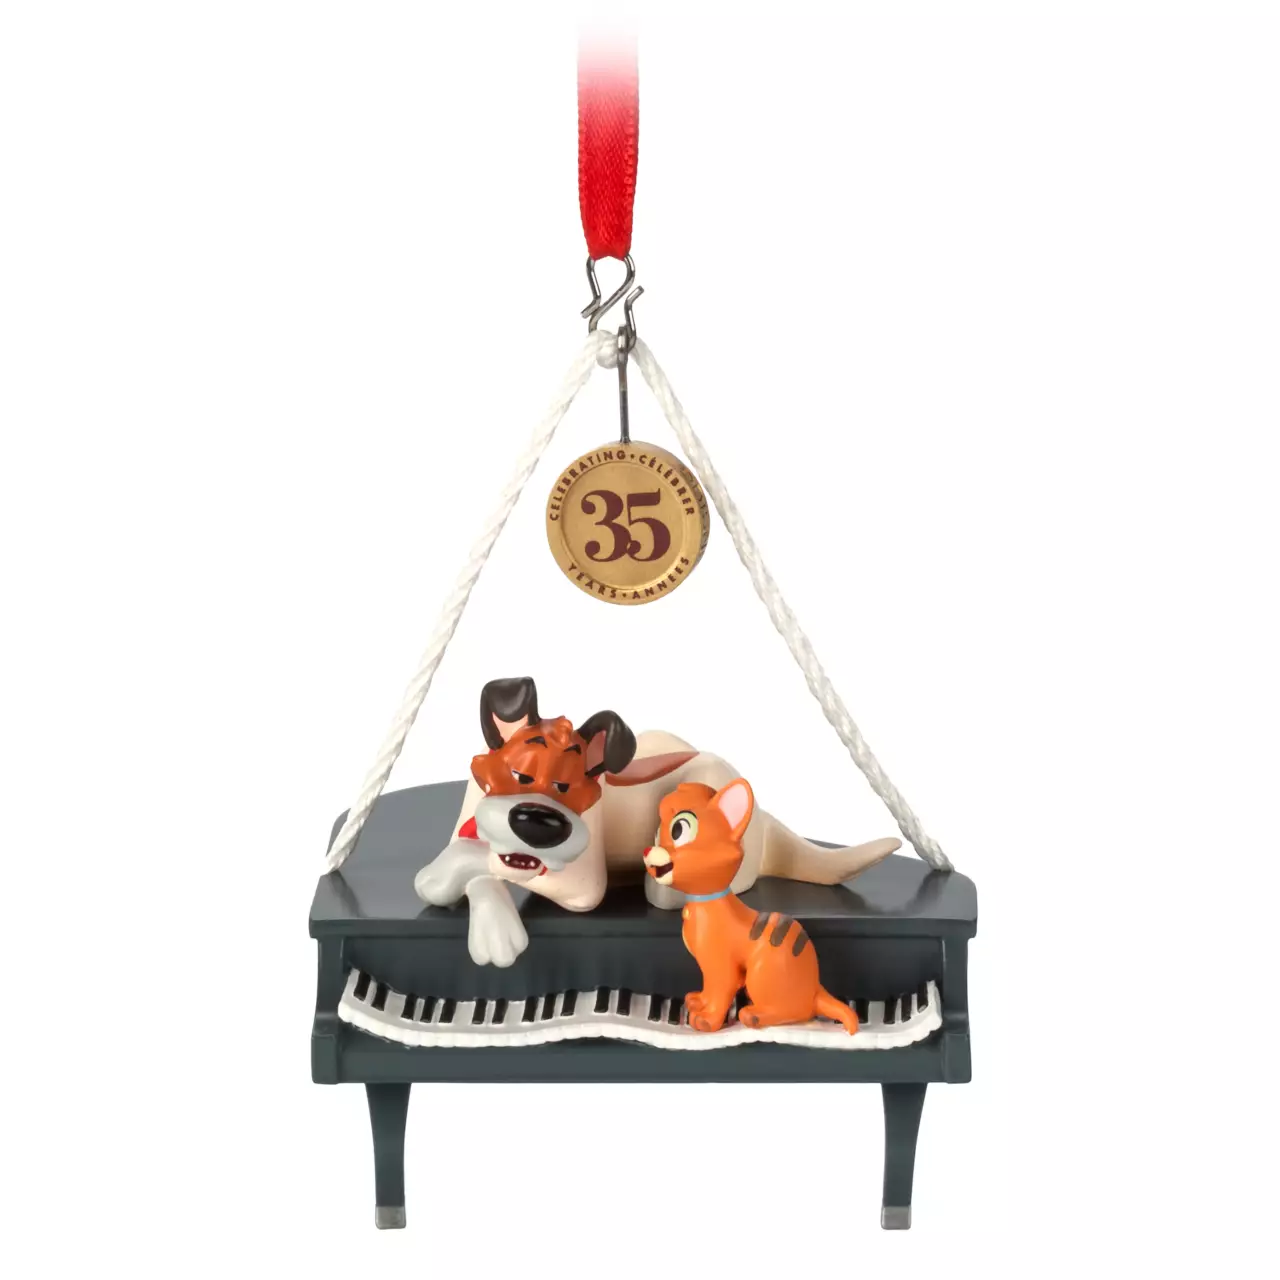 Oliver & Company Legacy Sketchbook Christmas Ornament – 35th Anniversary